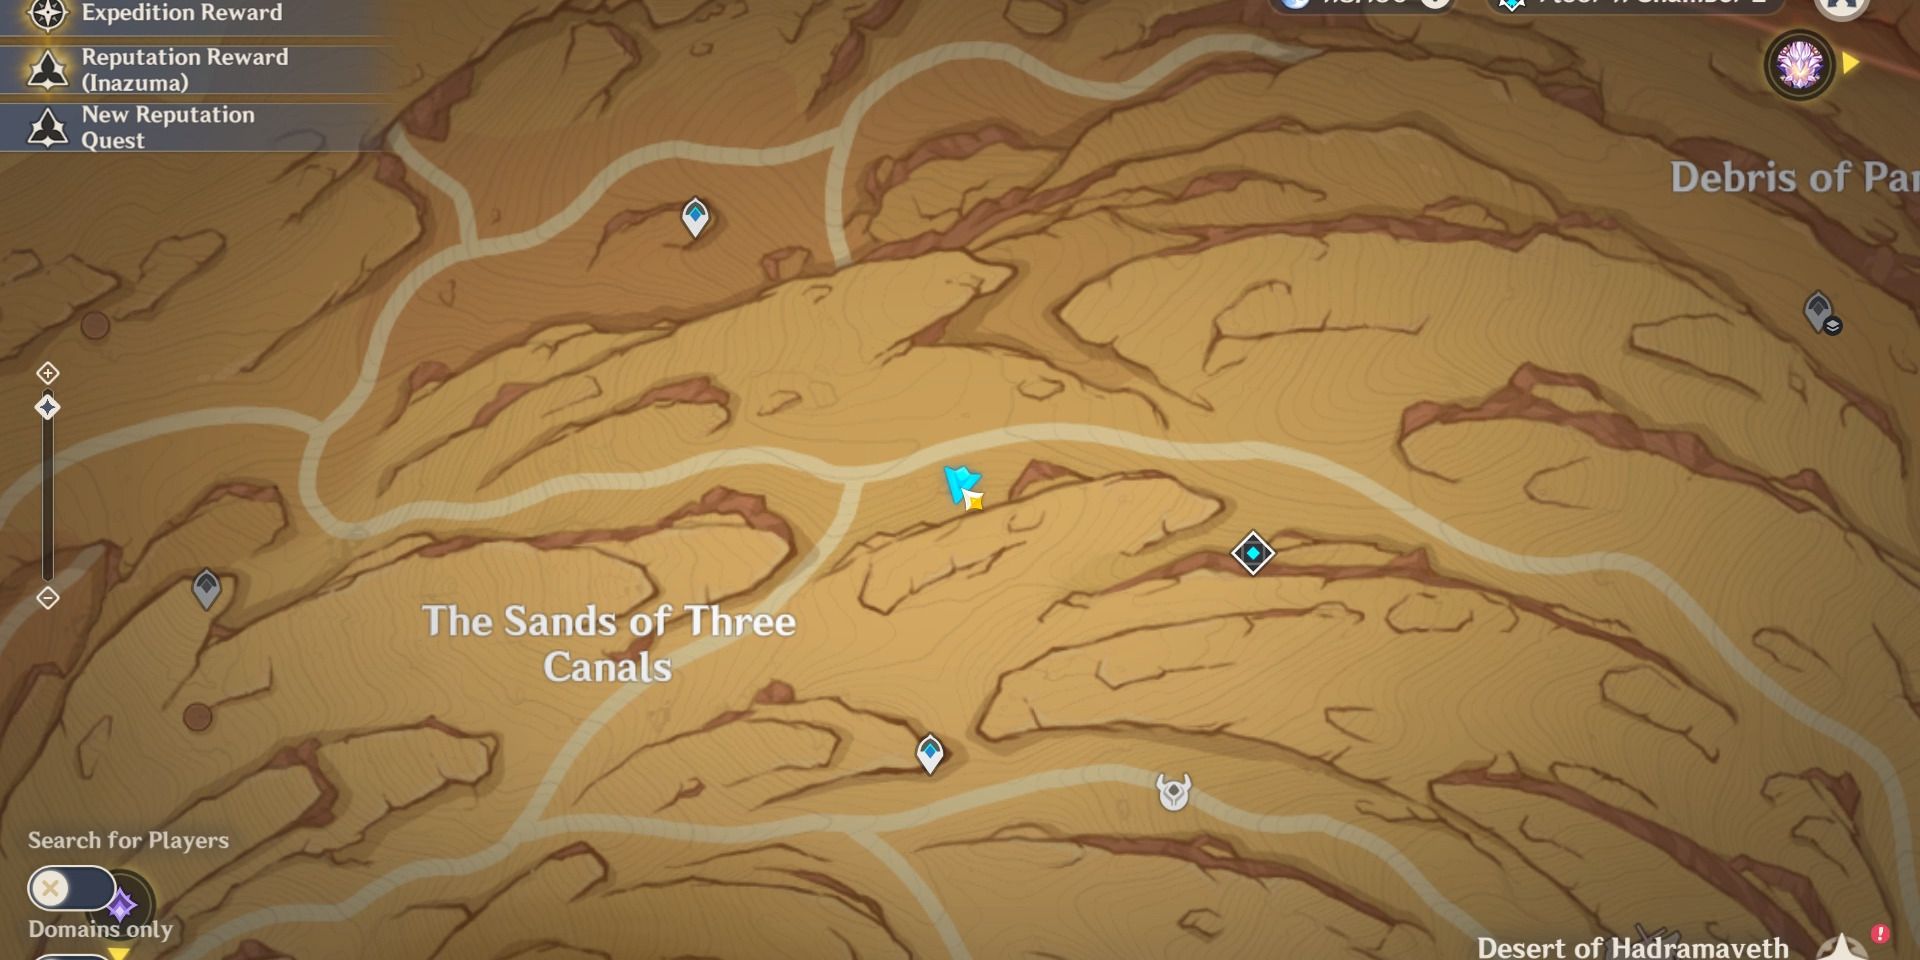 Image of the location on the map of the first mysterious stone slate in Genshin Impact.